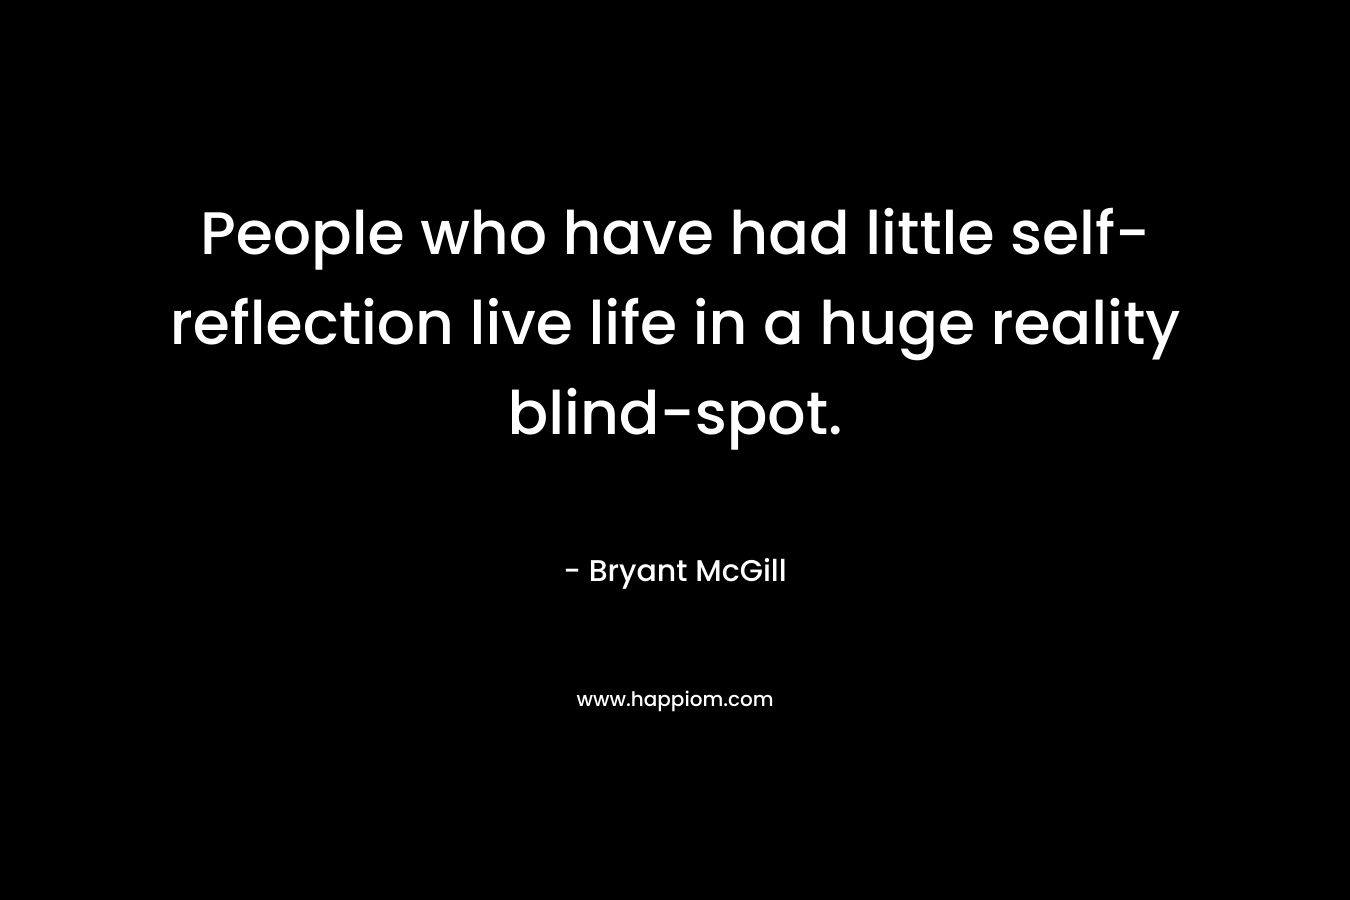 People who have had little self-reflection live life in a huge reality blind-spot.